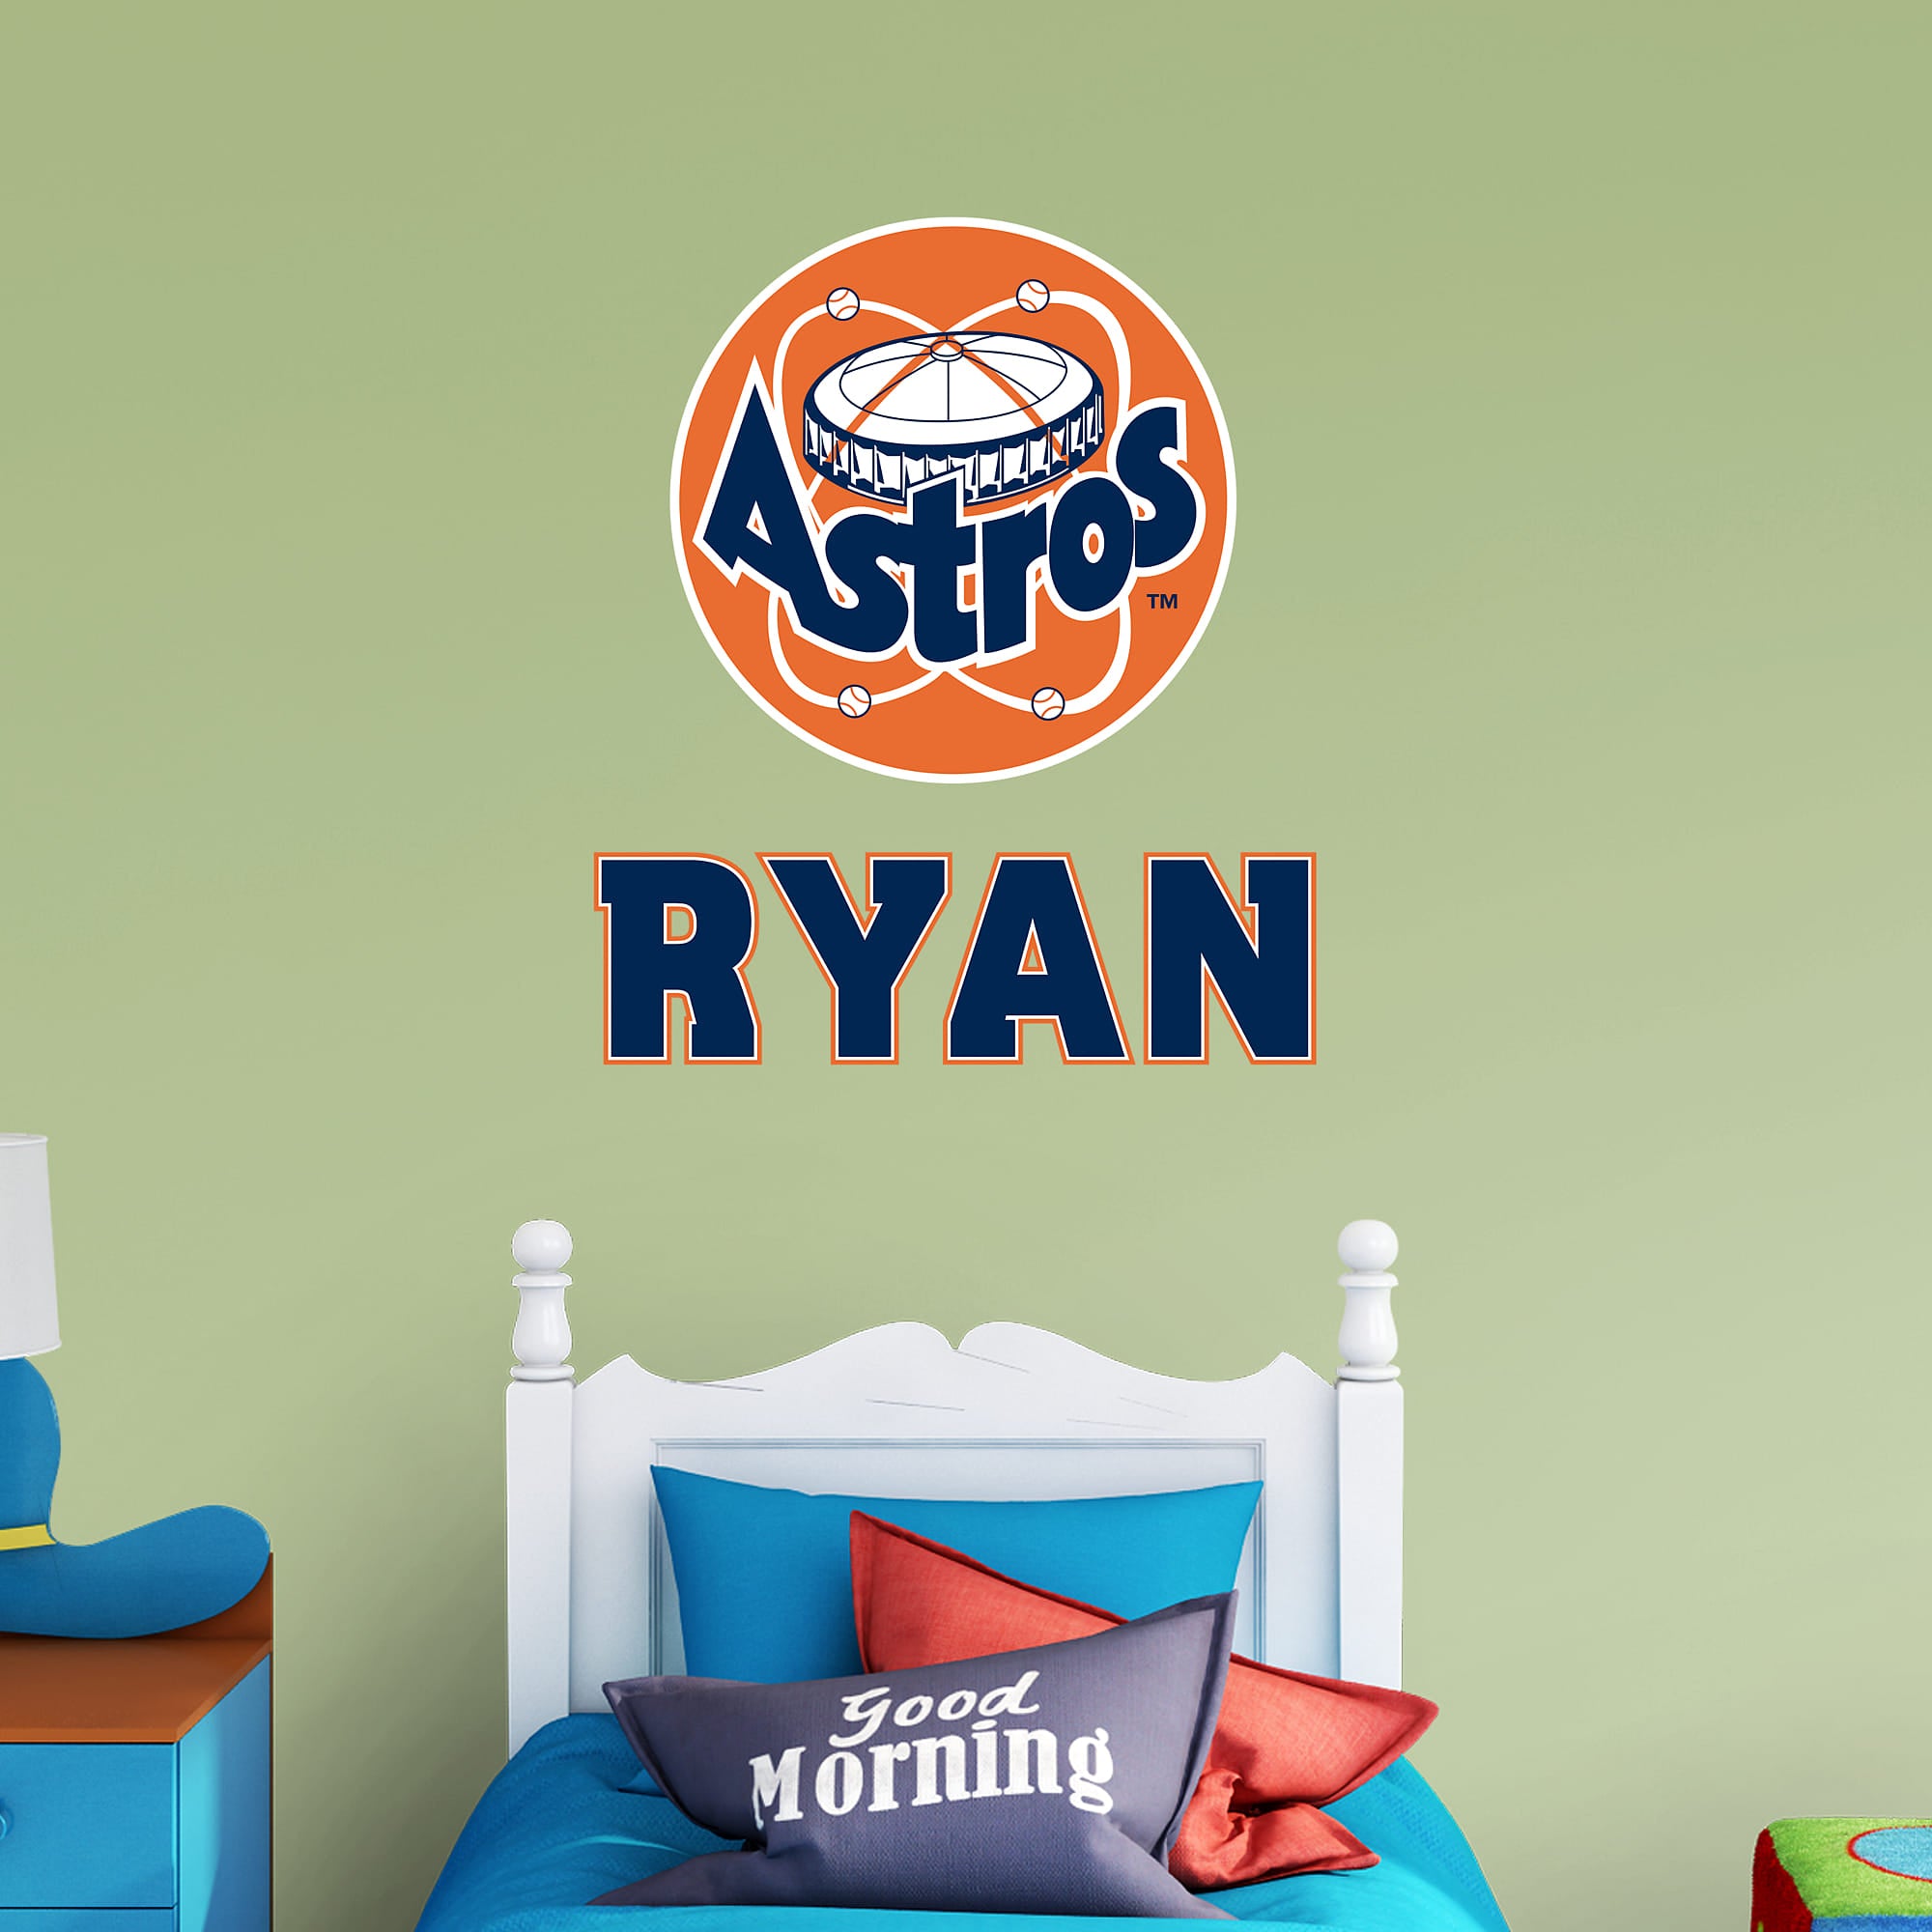 Houston Astros: Classic Stacked Personalized Name - Officially Licensed MLB Transfer Decal in Navy (52"W x 39.5"H) by Fathead |